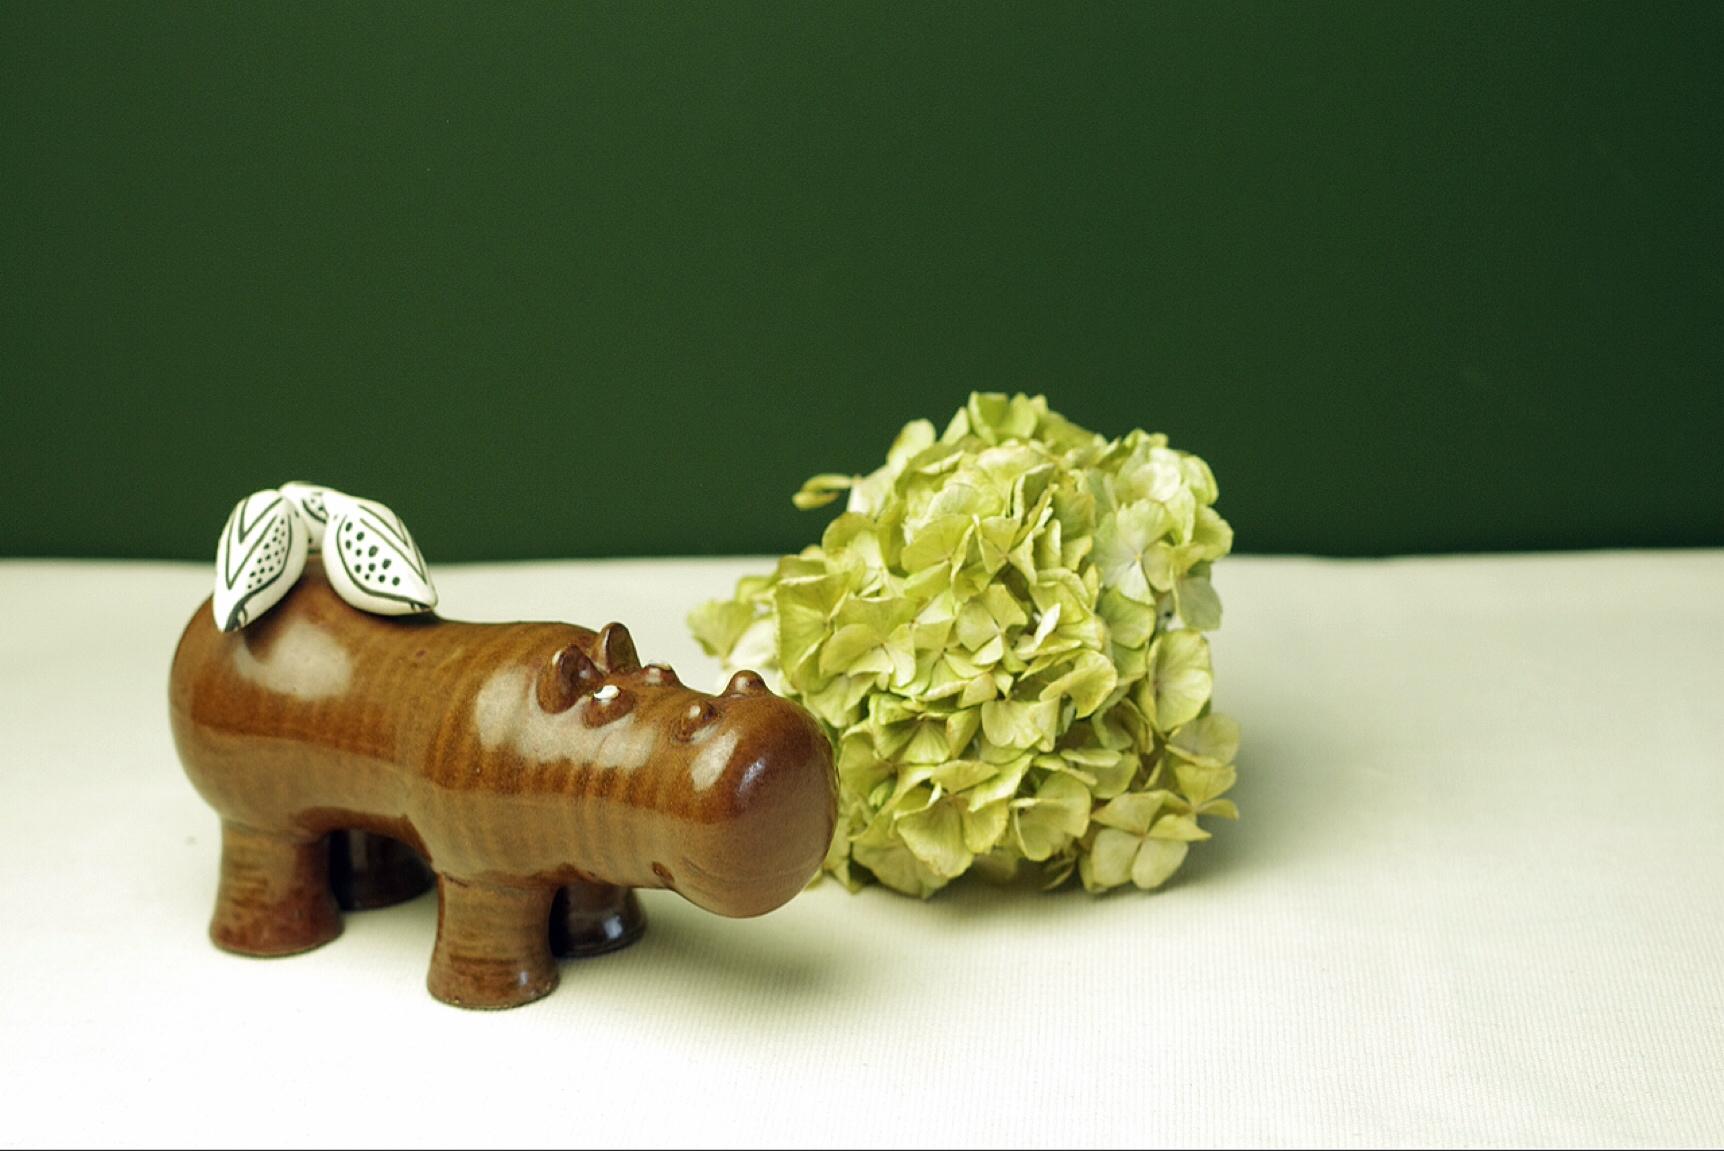 Product Description: 
Lisa Larson is arguably the most famous ceramist from Scandinavia. She is known for her cute looking animal figures as well as for unique design pieces. On offer here is a animal figure produced by Gustavsberg belonging to the